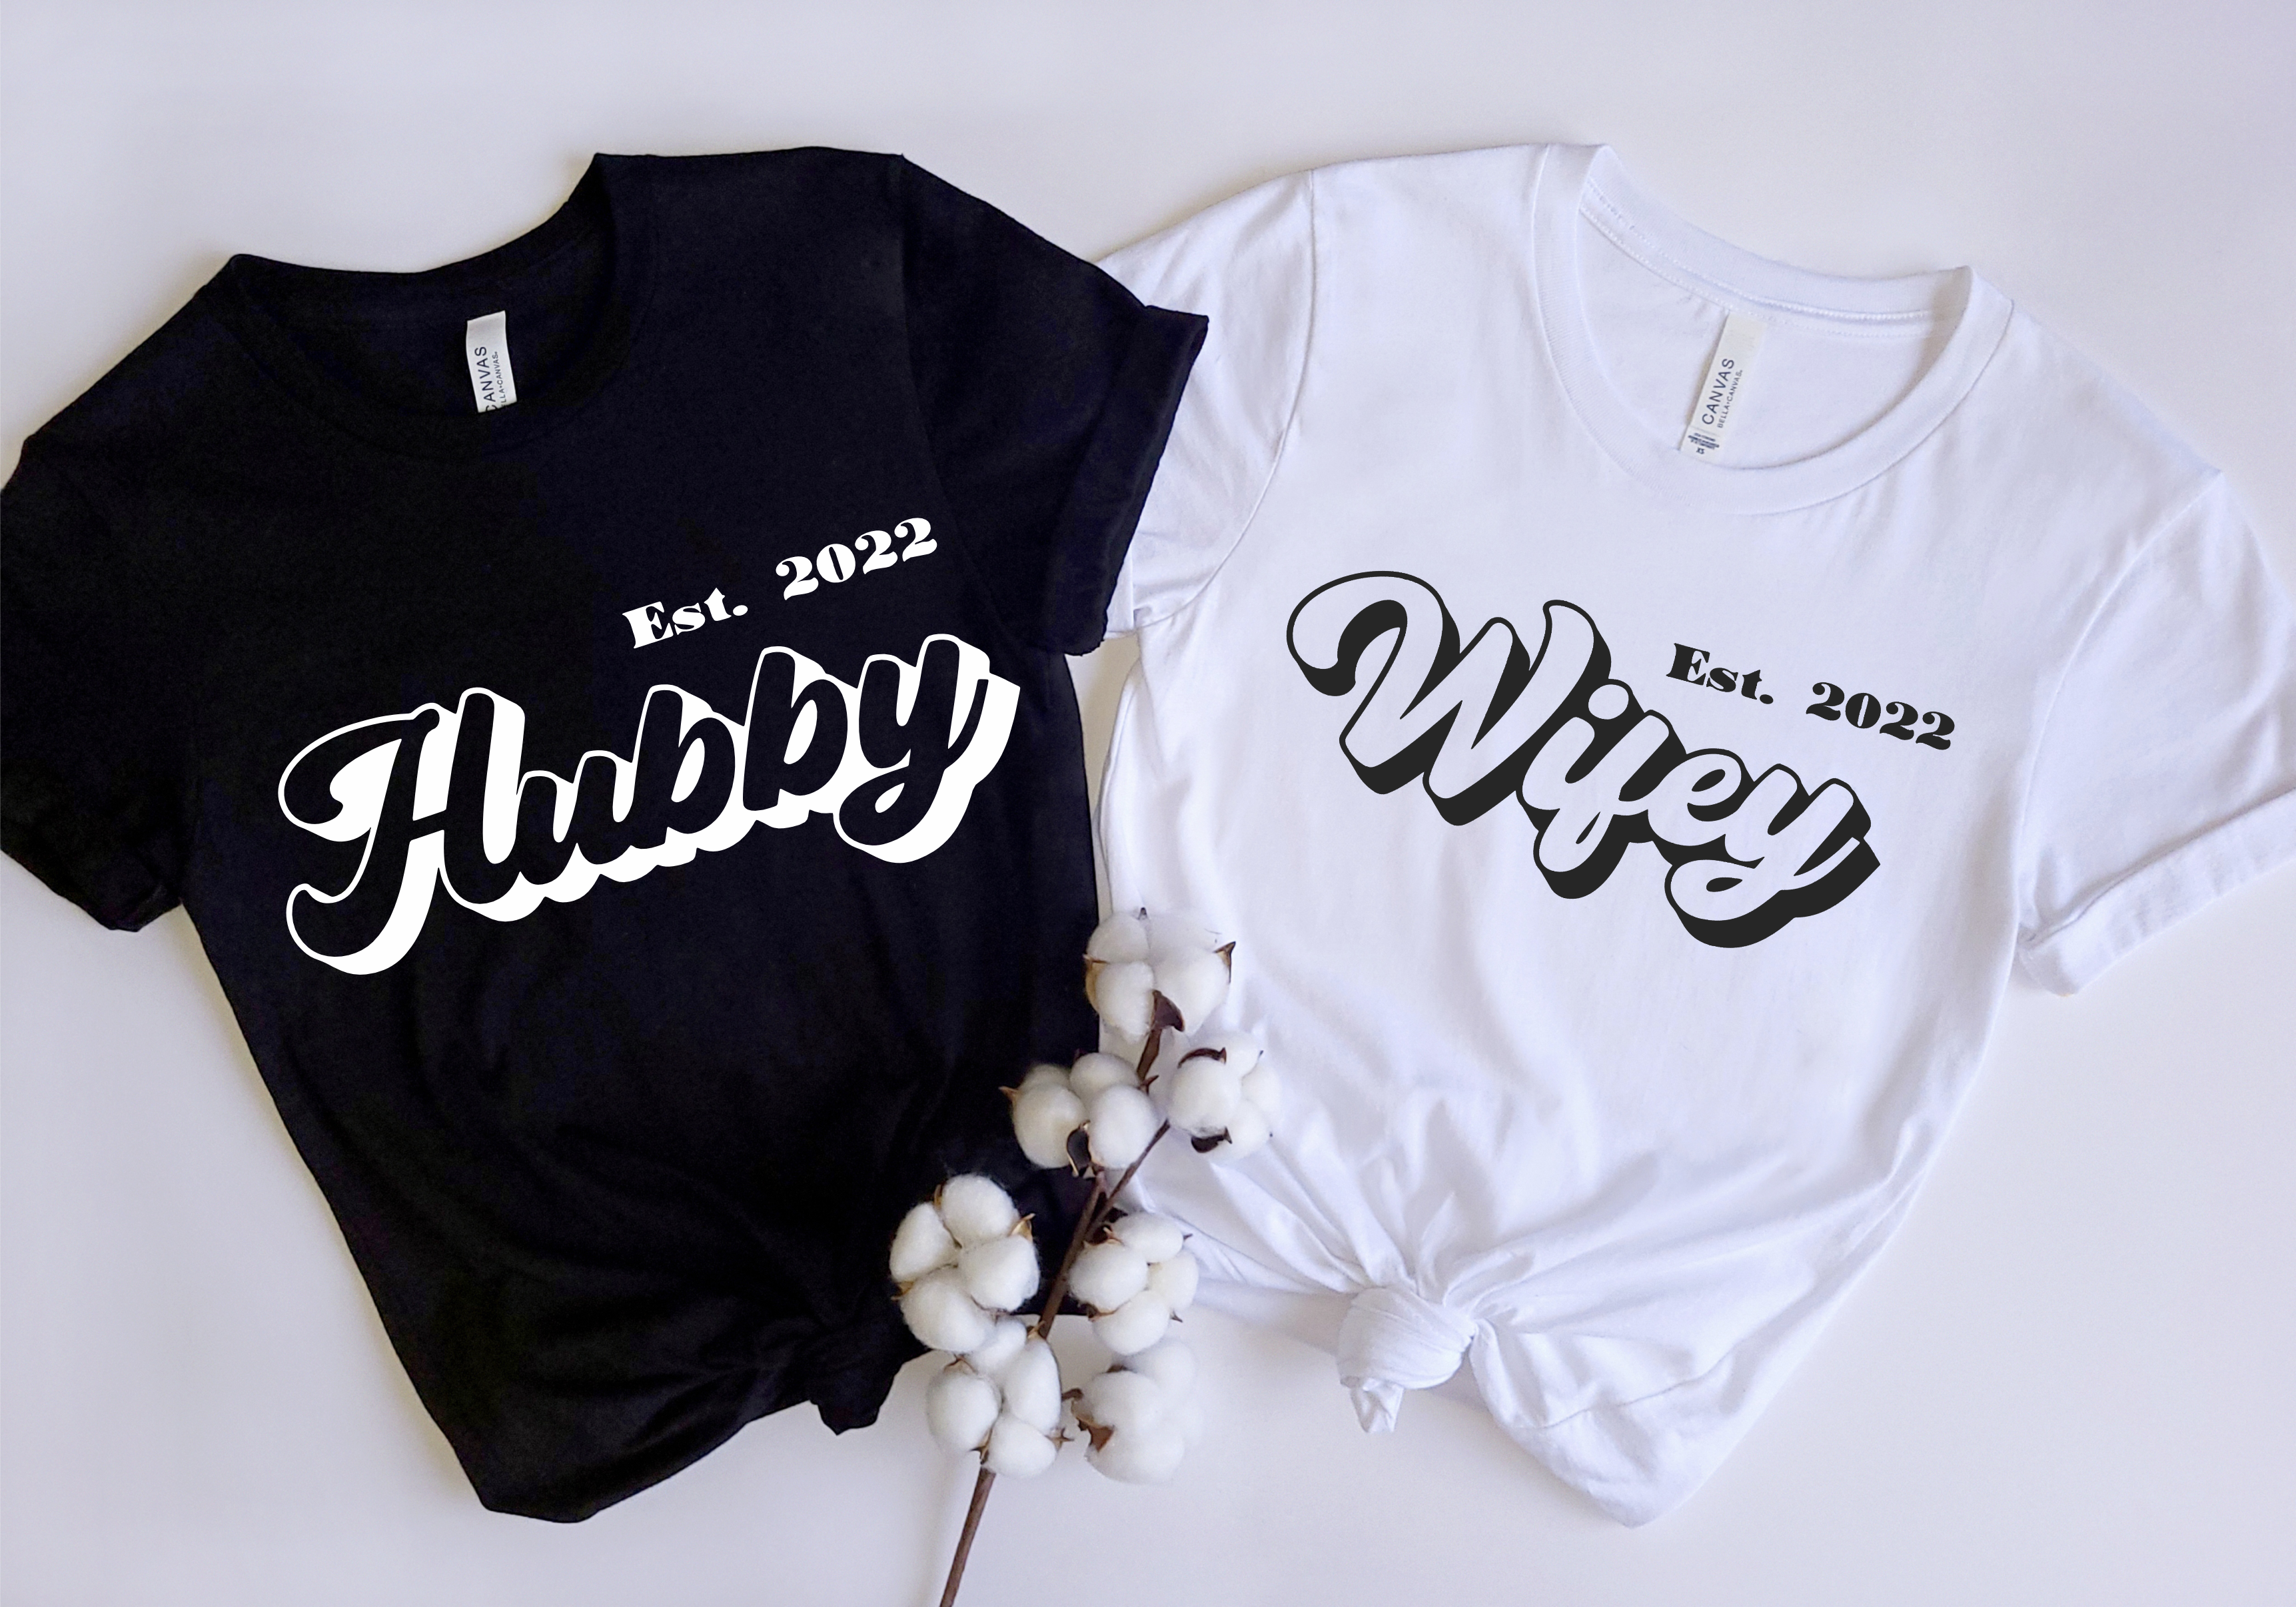 Retro Hubby or Wifey Shirt  - Commercially Printed Shirt - Fast Turn Around Time